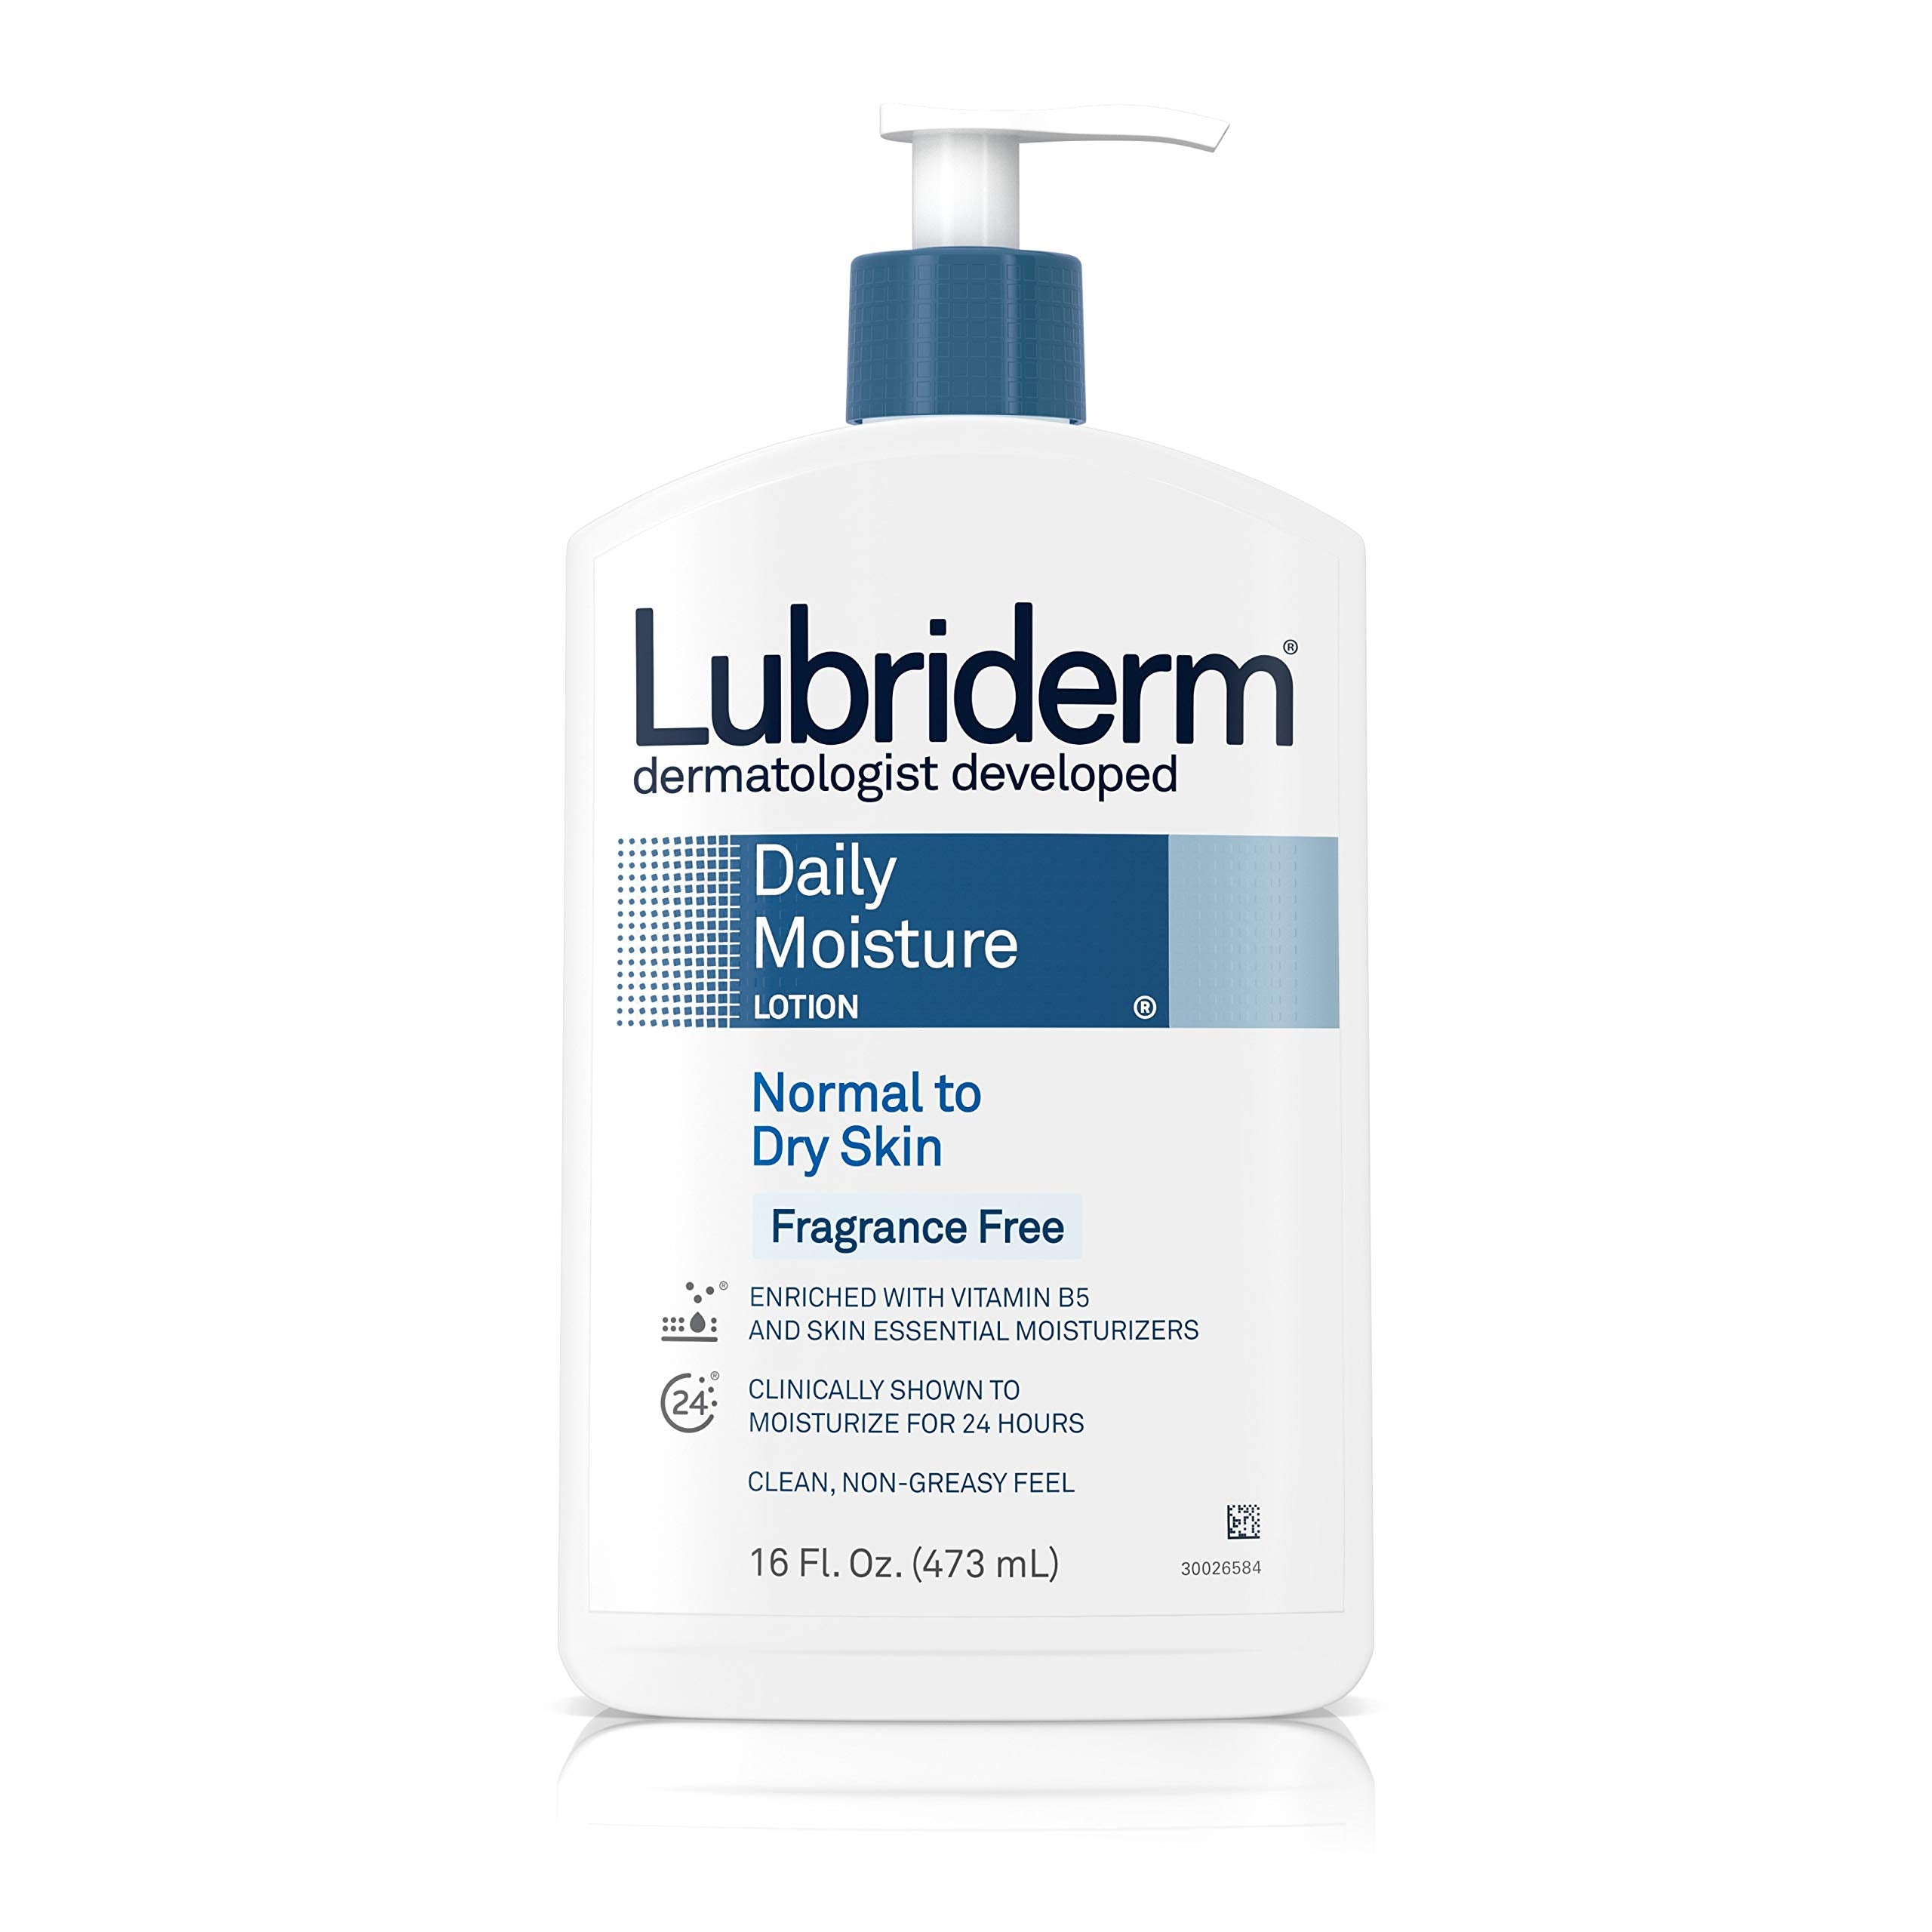 Lubriderm Daily Moisture Hydrating Unscented Body Lotion with Vitamin B5 for Normal to Dry Skin, Non-Greasy and Fragrance-Free Lotion. 16 fl. oz